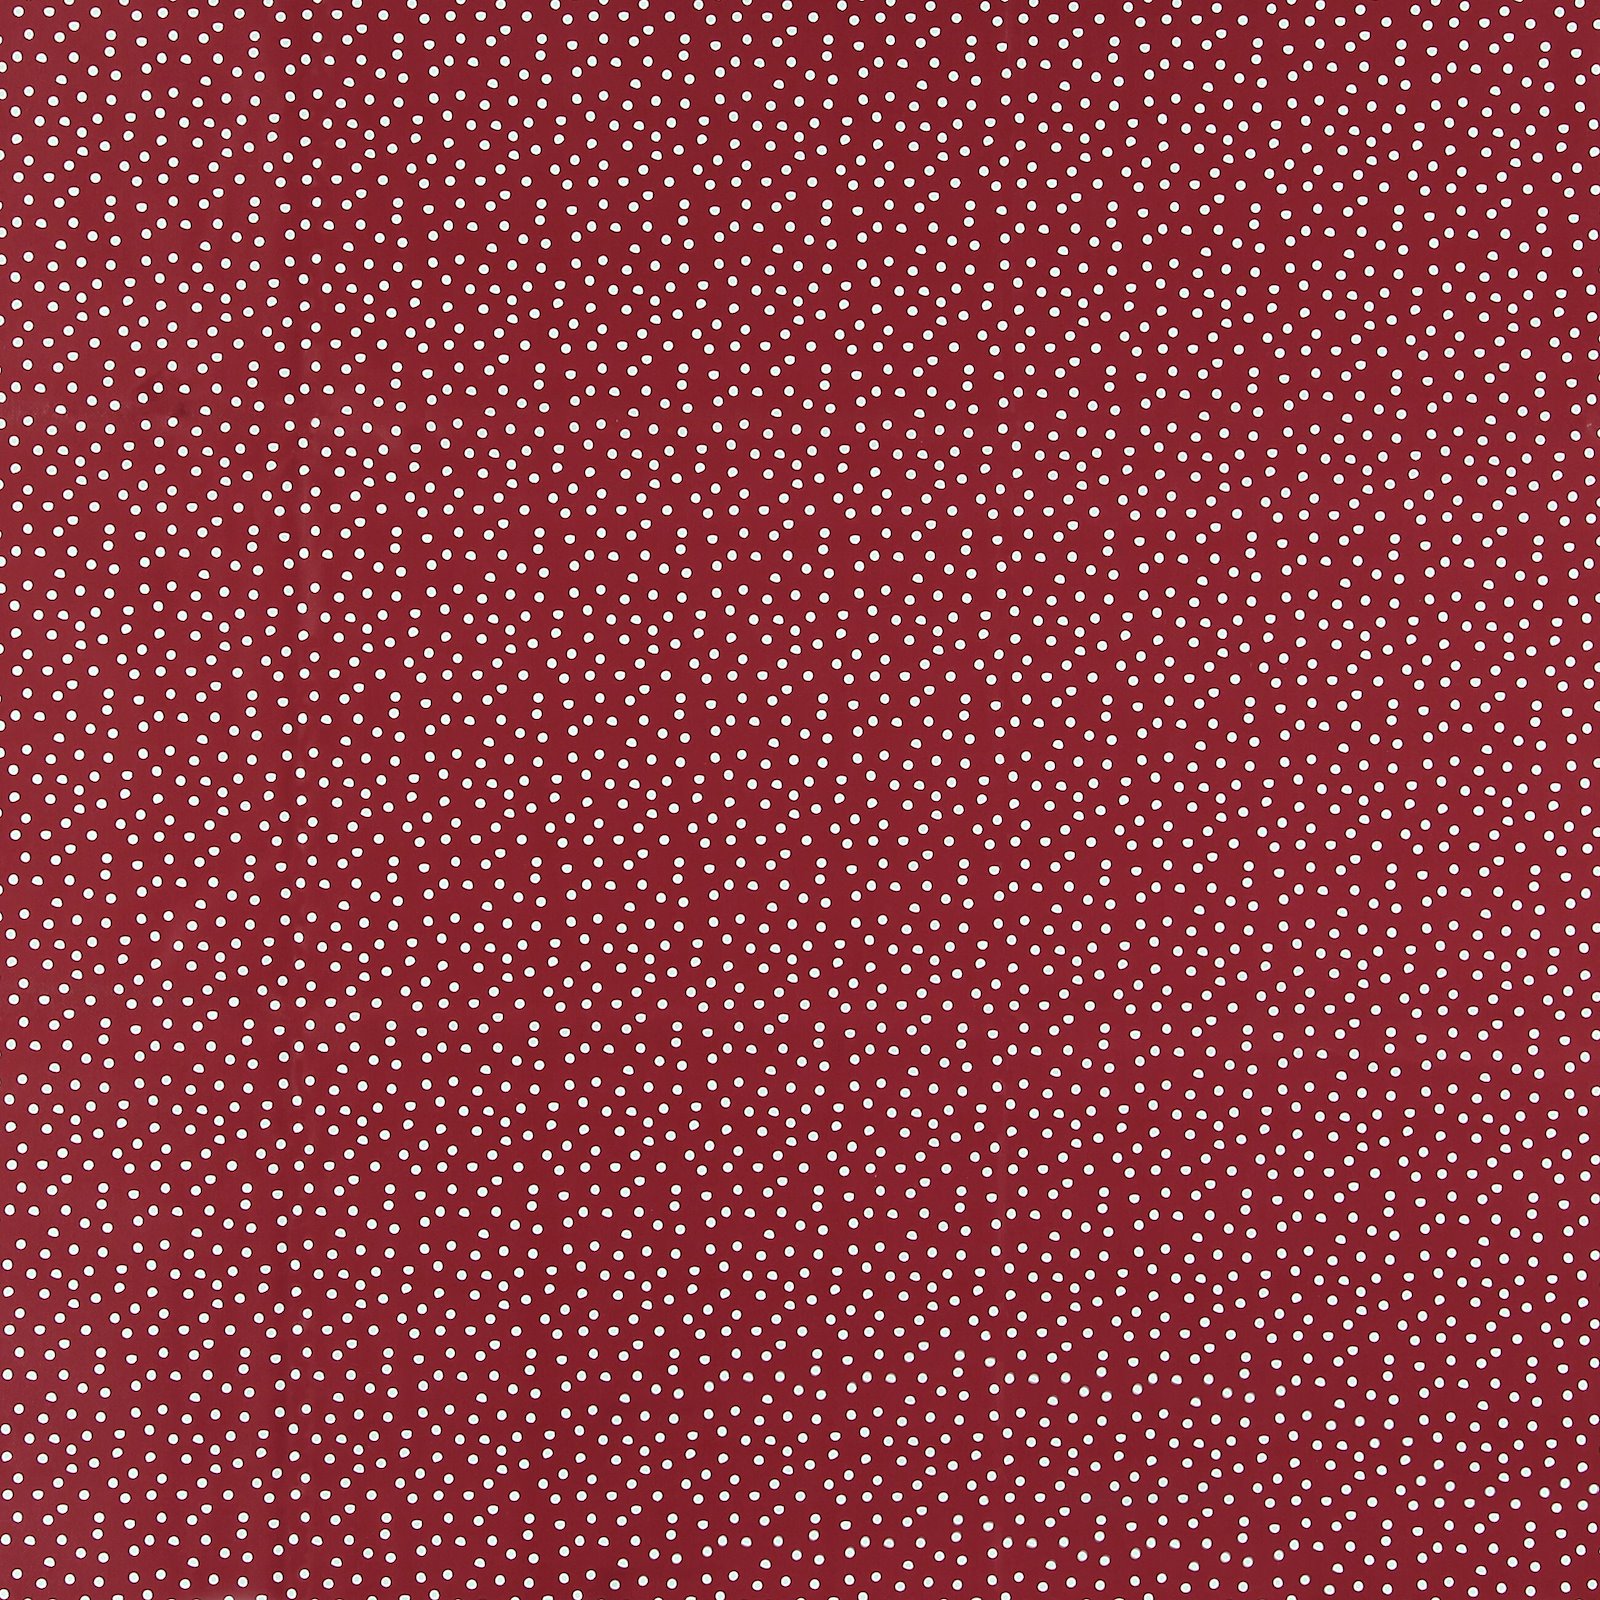 Non-woven oilcloth red w white dots 866125_pack_sp